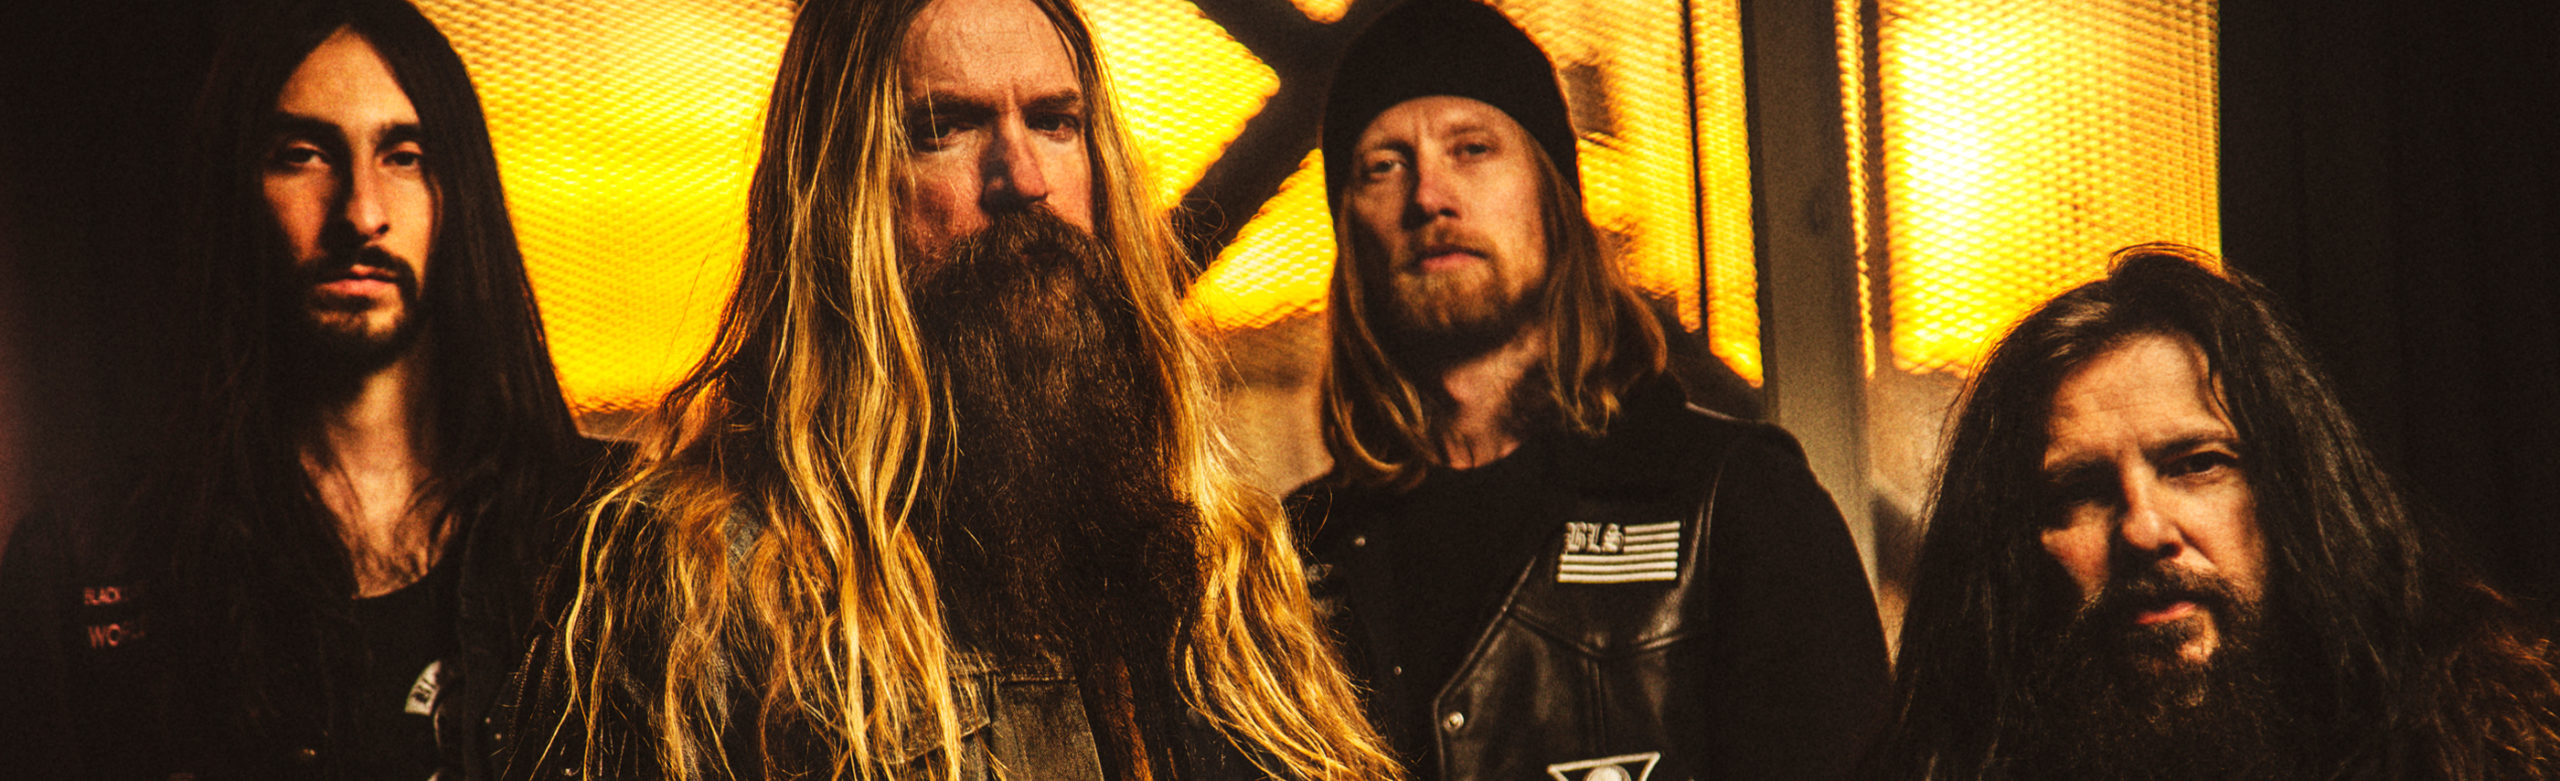 Event Info: Black Label Society at the Wilma 2019 Image